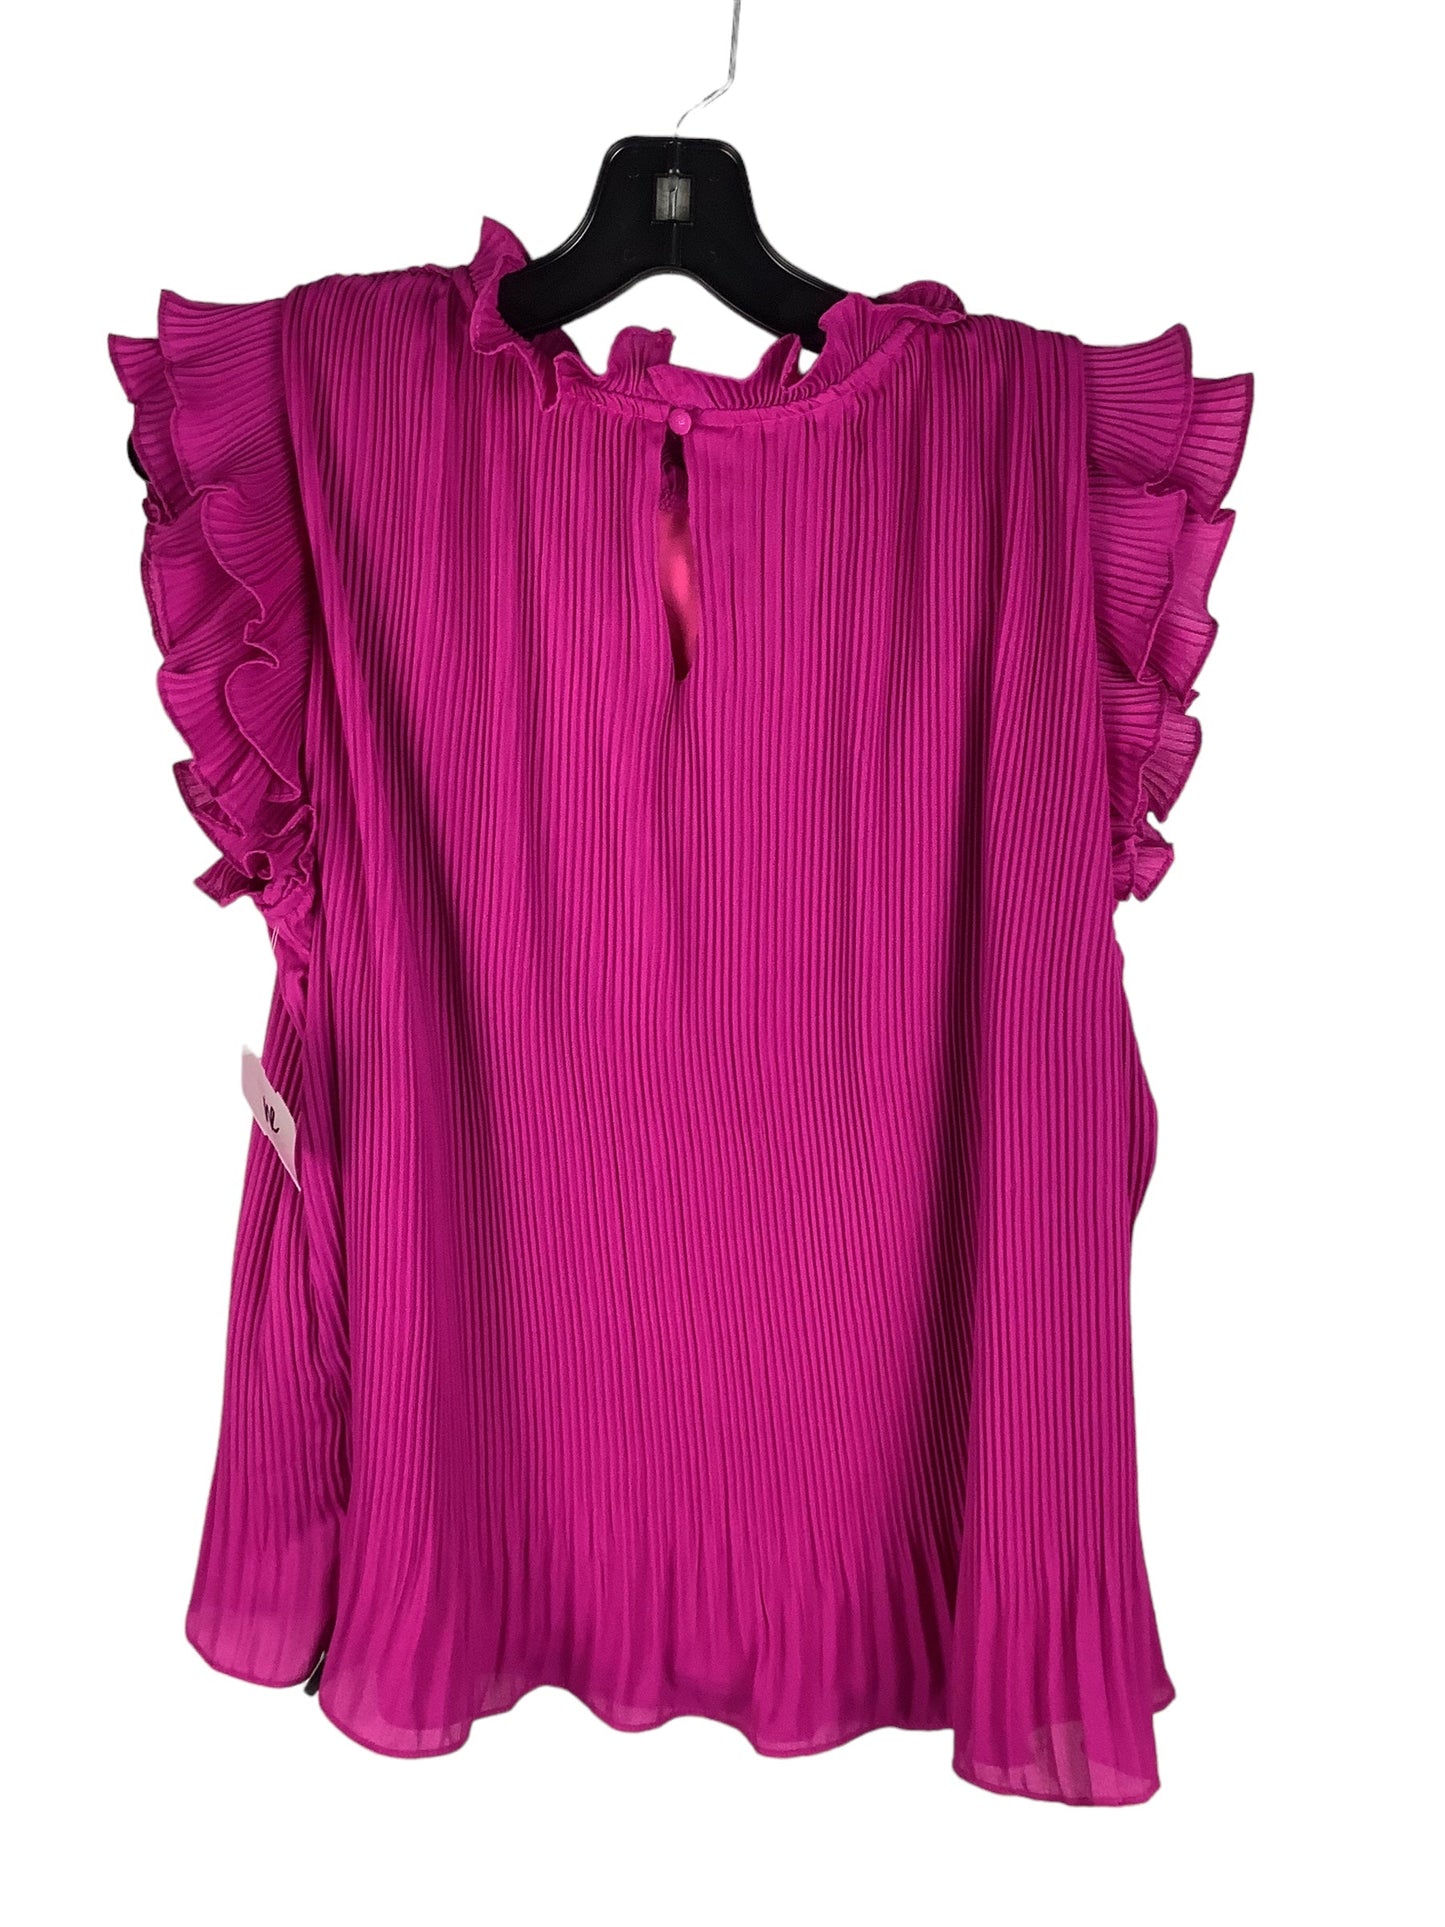 Pink Top Short Sleeve Tcec, Size L